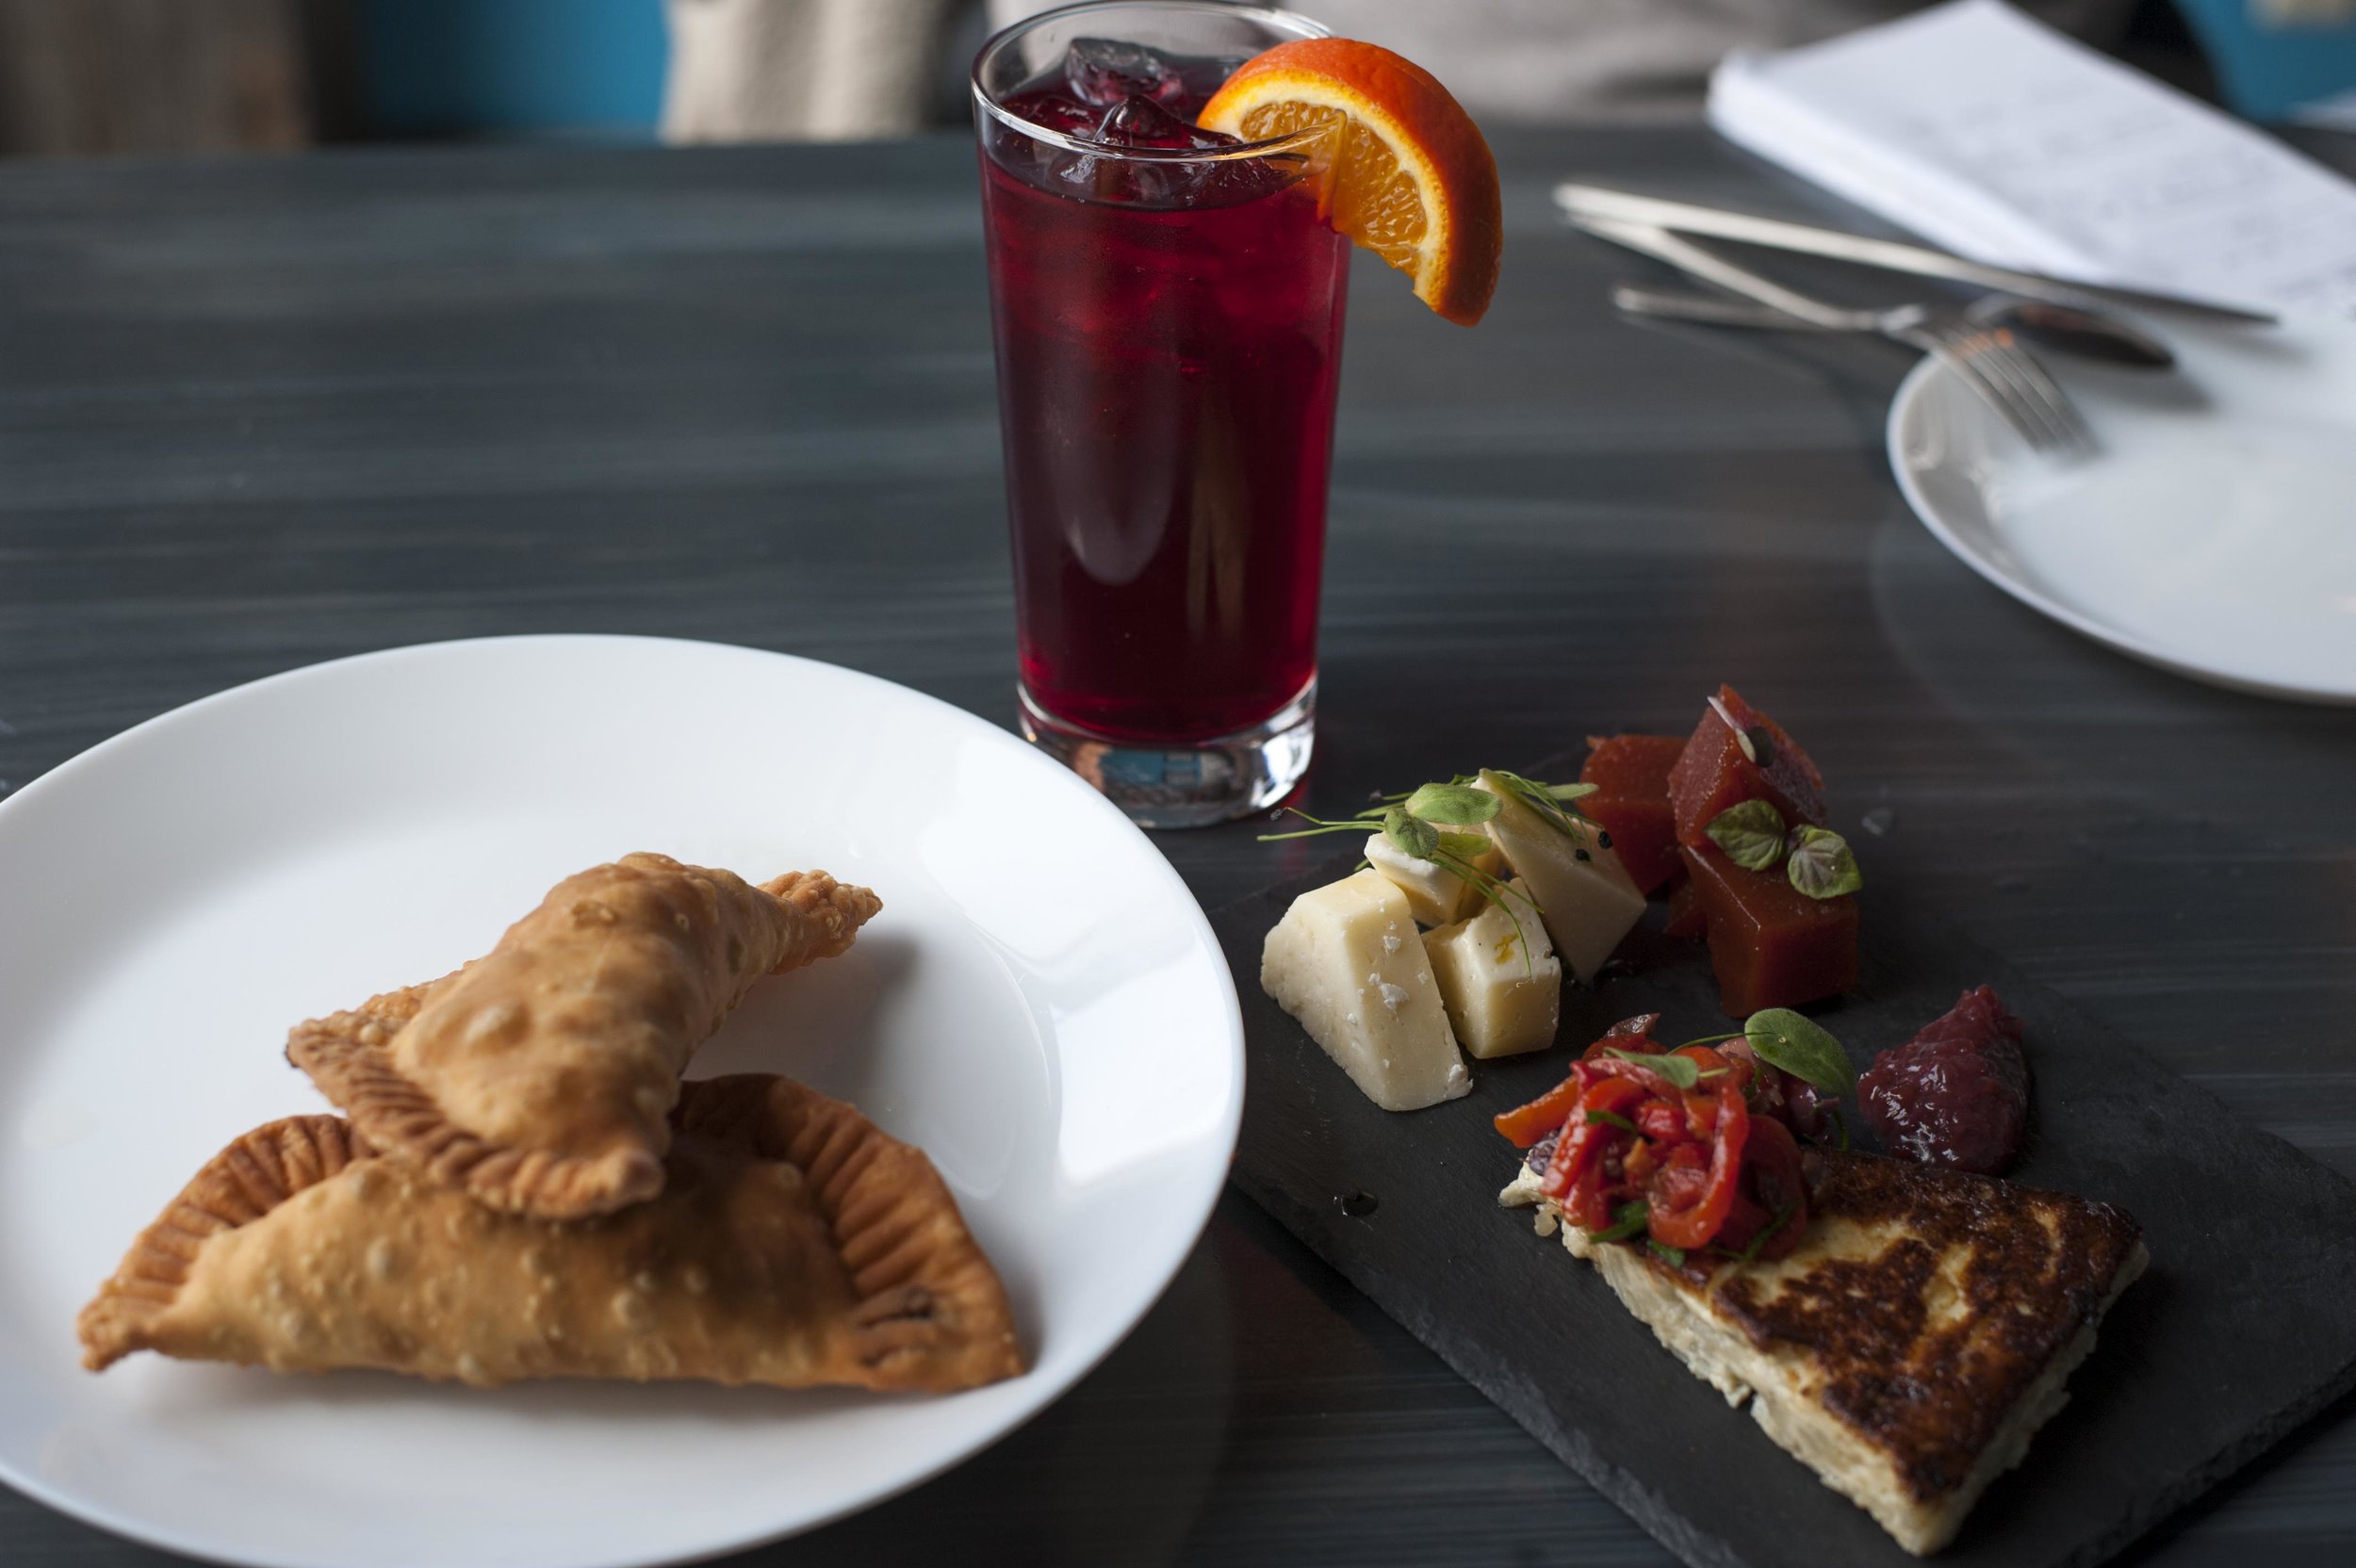   Babalu's classic baked empanadas and Guava Plate, along with a glass of non-alcoholic sangria. &nbsp; Long Islander News Photo/File  